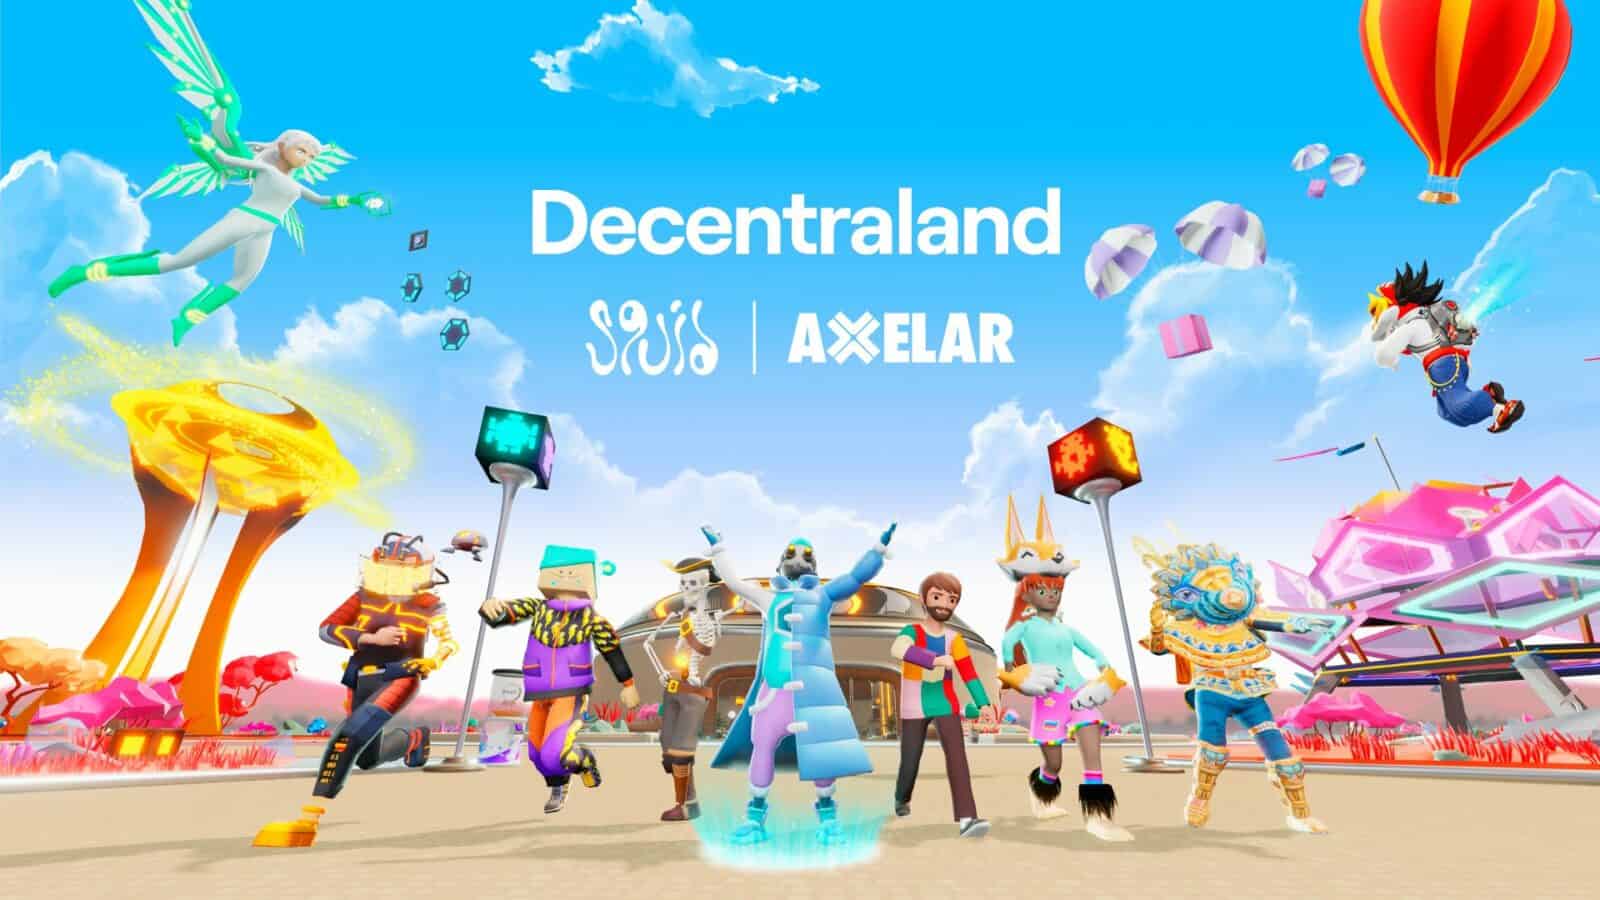 Decentraland: Squid Enables Seamless Cross-Chain NFT Purchases